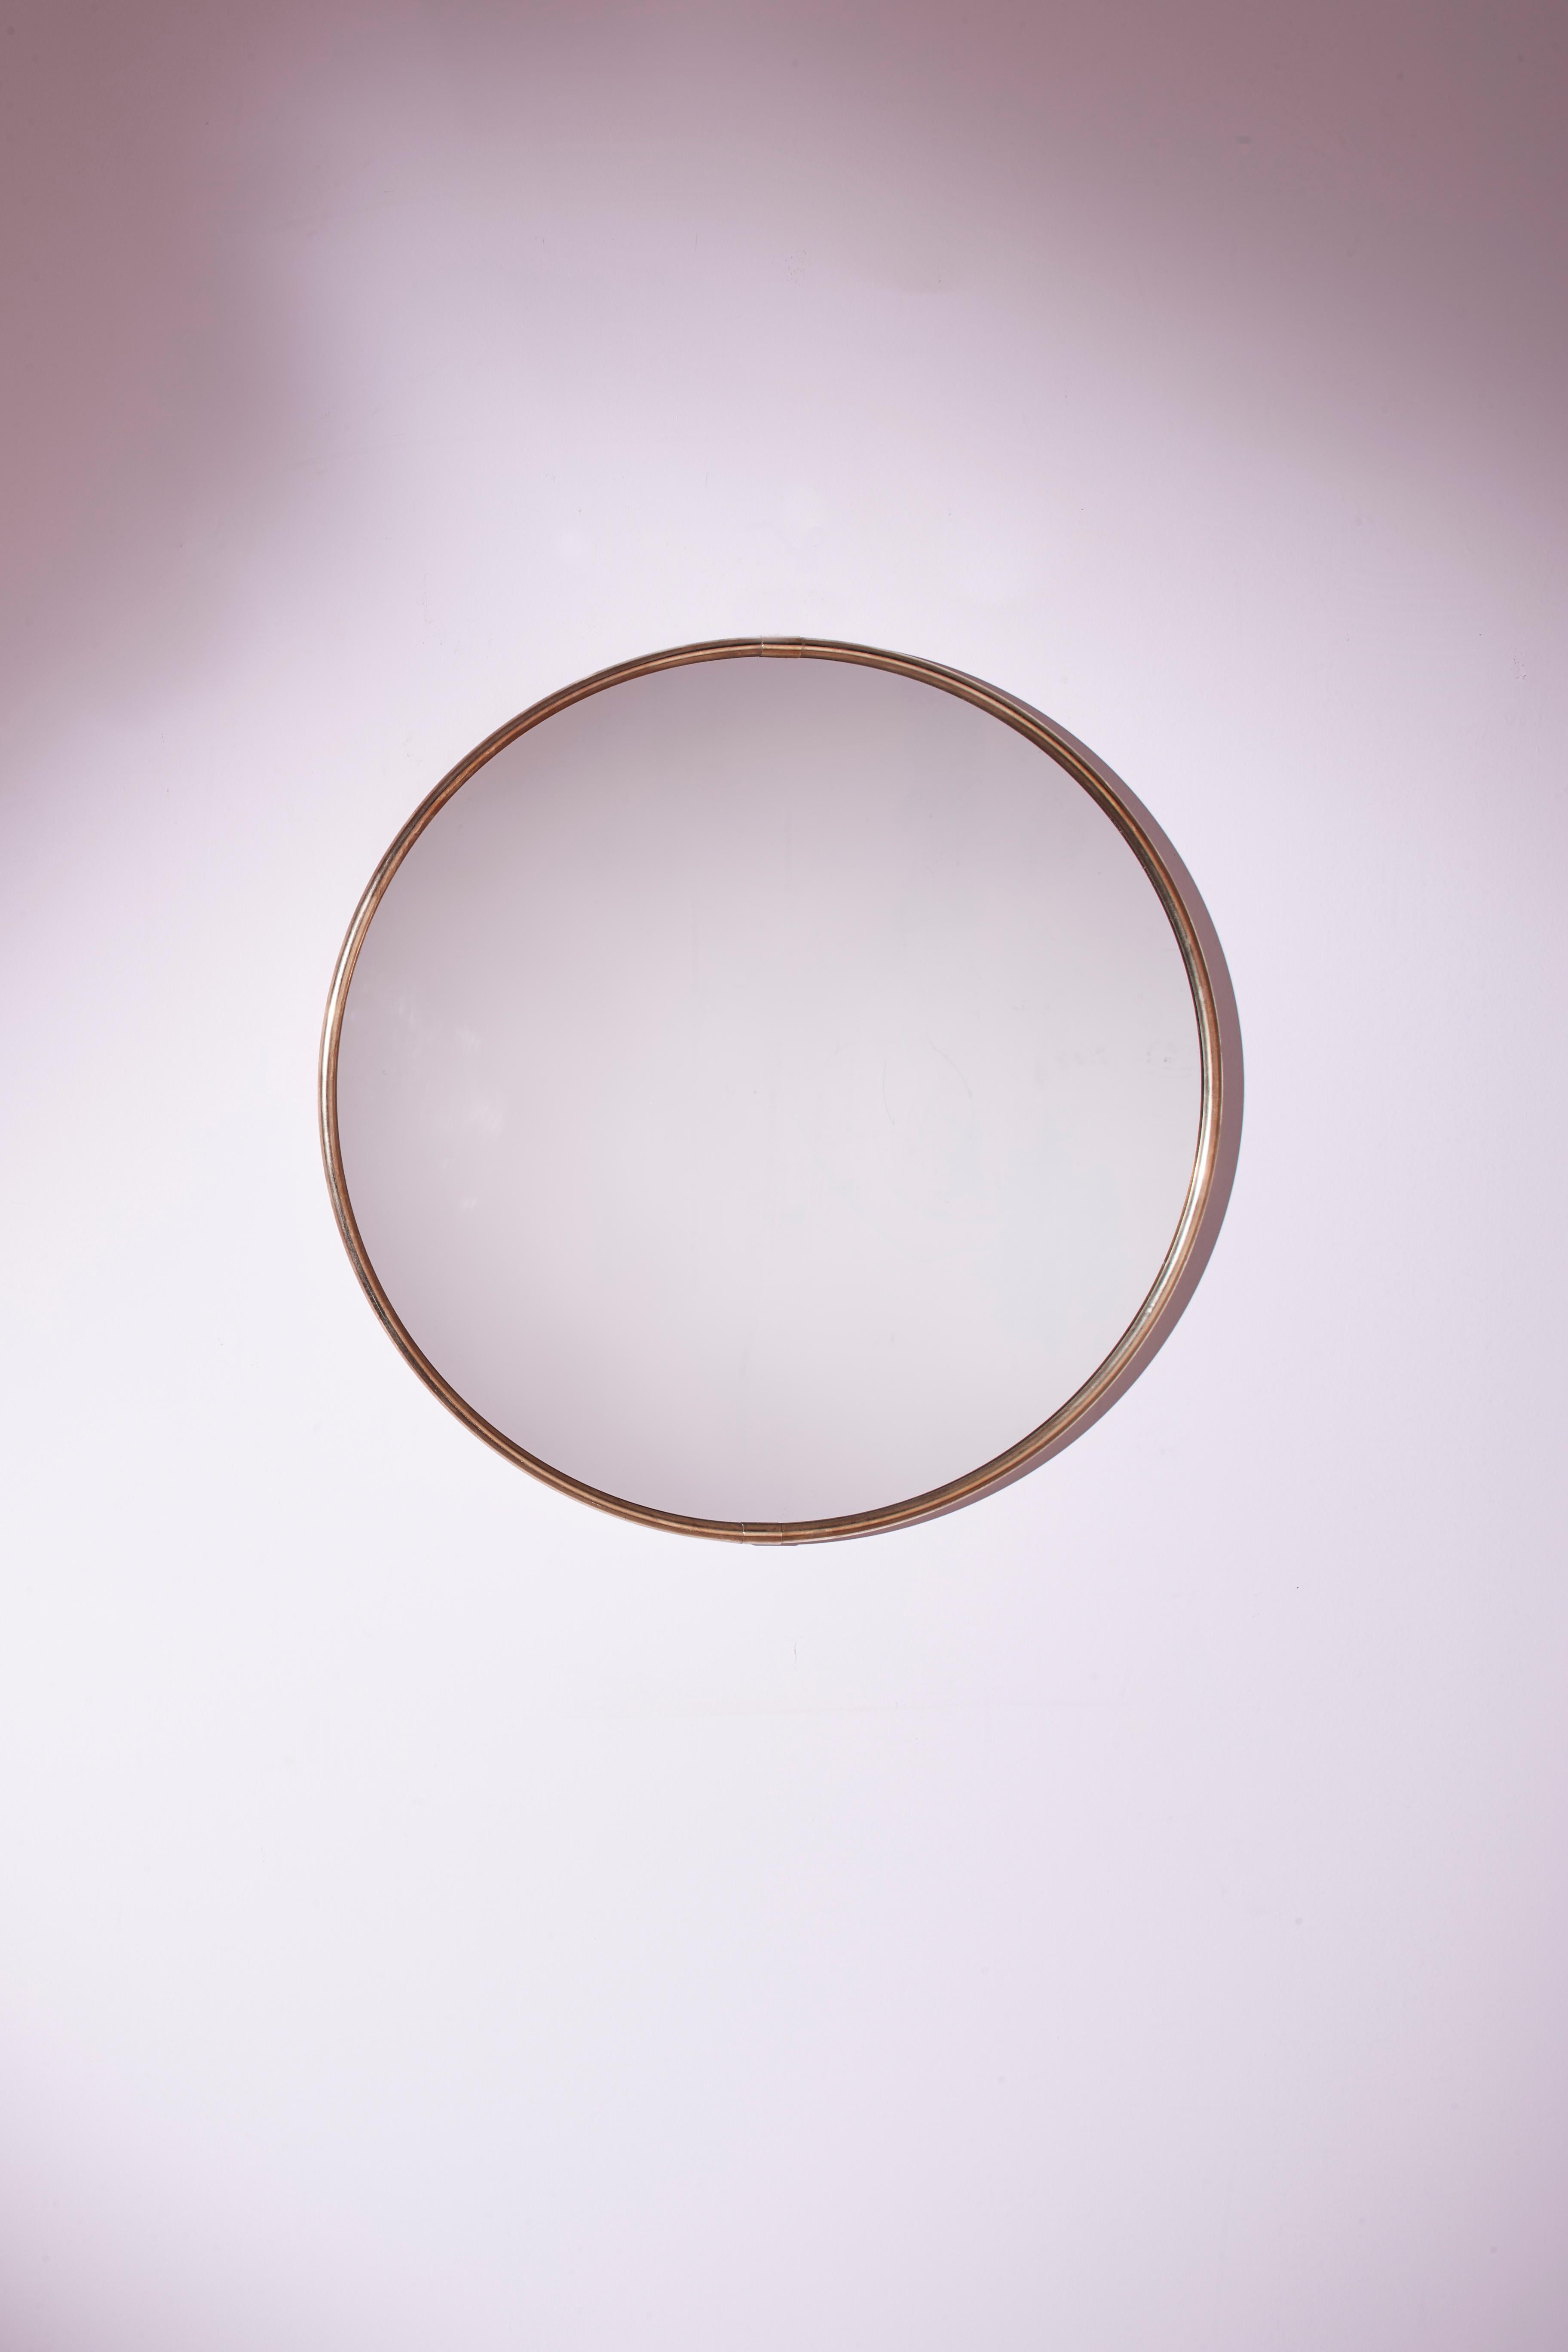 A charming circular mirror of Italian craftsmanship dating back to the seventies, characterized by an original reflective plate and a thin brass frame.

This refined piece of furniture is perfect for enhancing the entrance, bedroom, or bathroom,